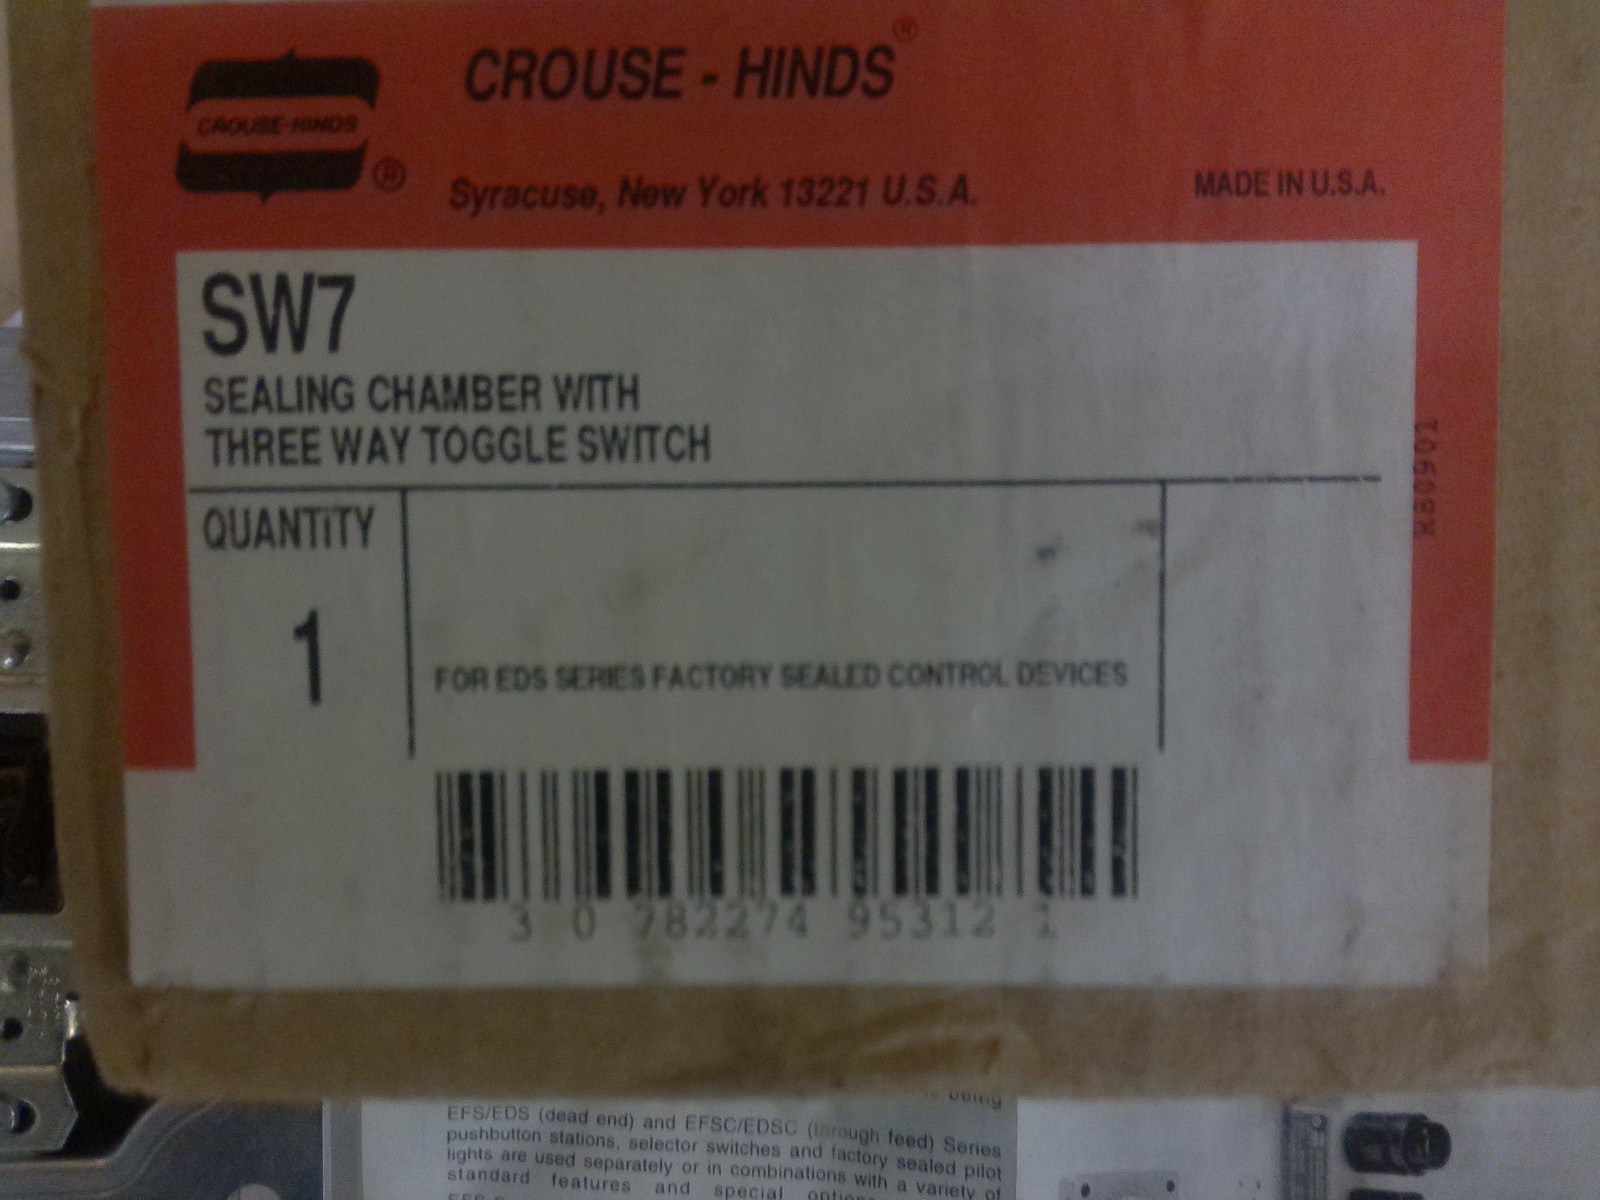 CROUSE HINDS SW7 EXPLOSION PROOF SEALING CHAMBER WITH (3) WAY TOGGLE SWITCH - $128.59